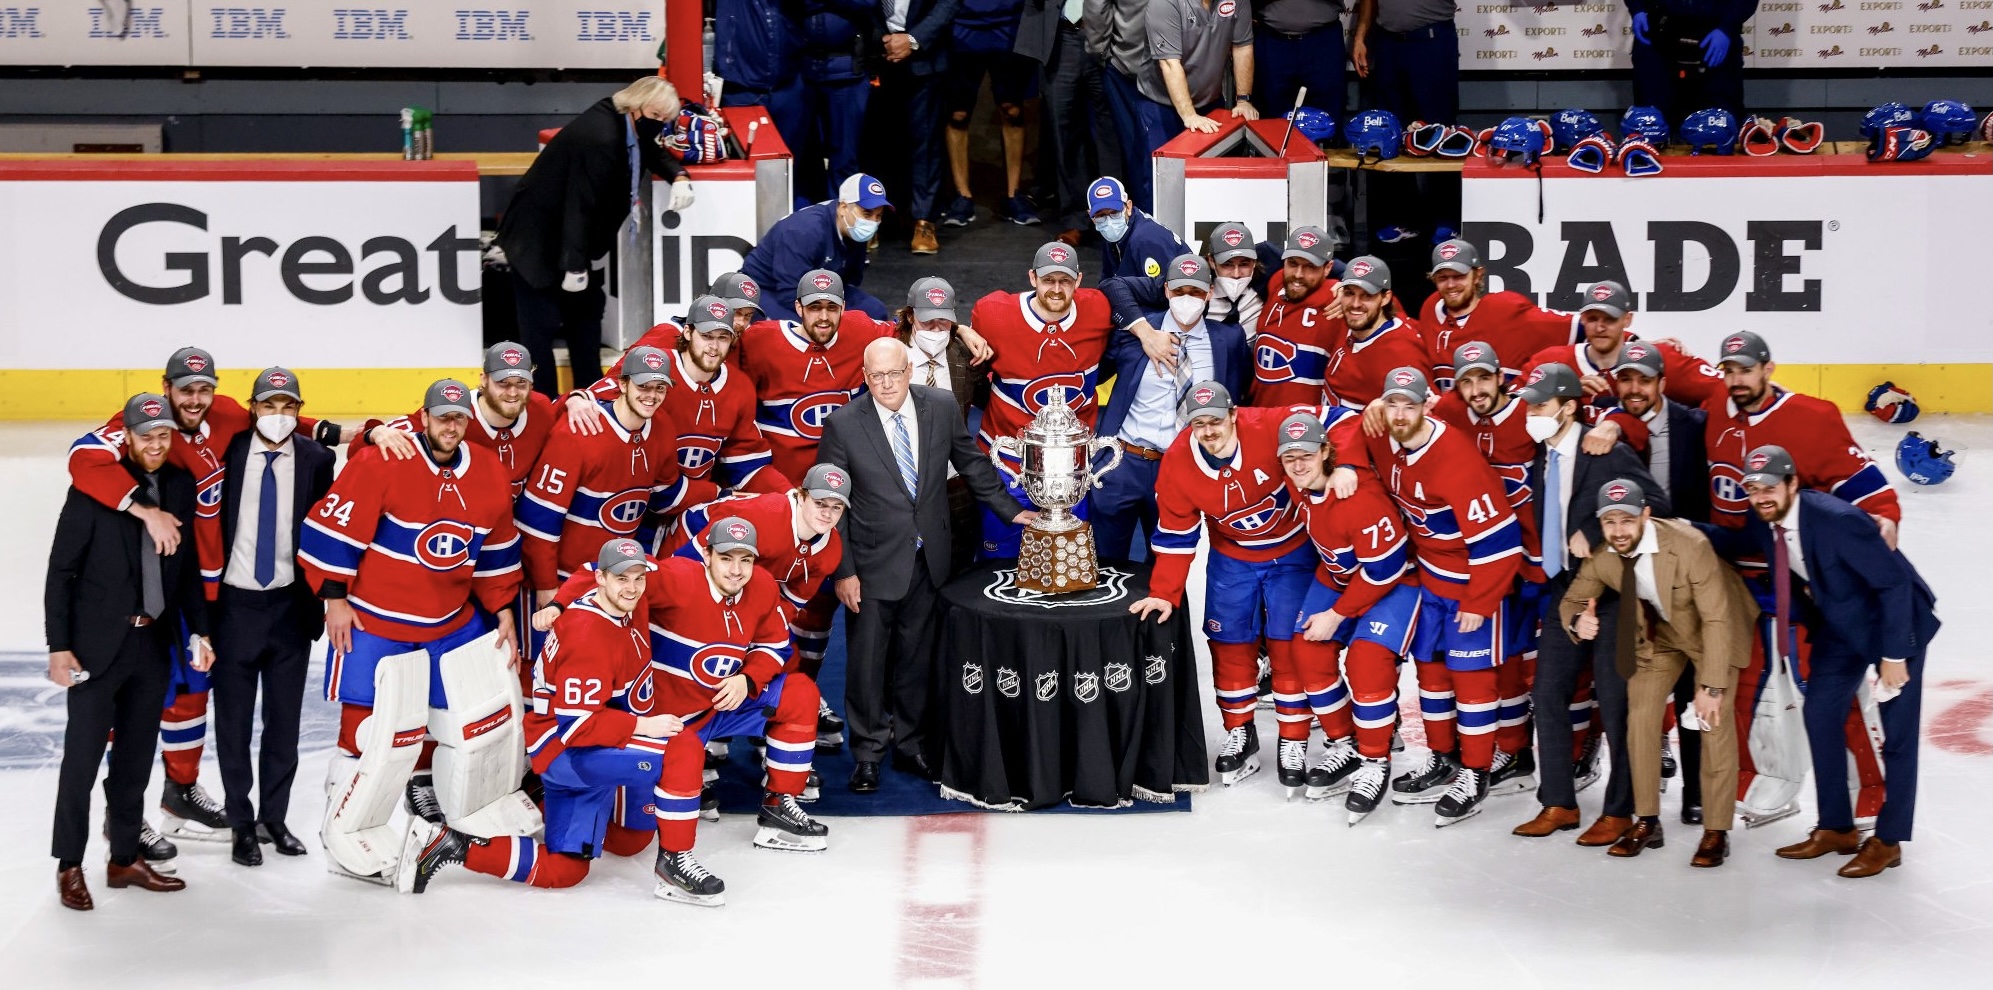 The Canadiens are ready to bring Stanley home